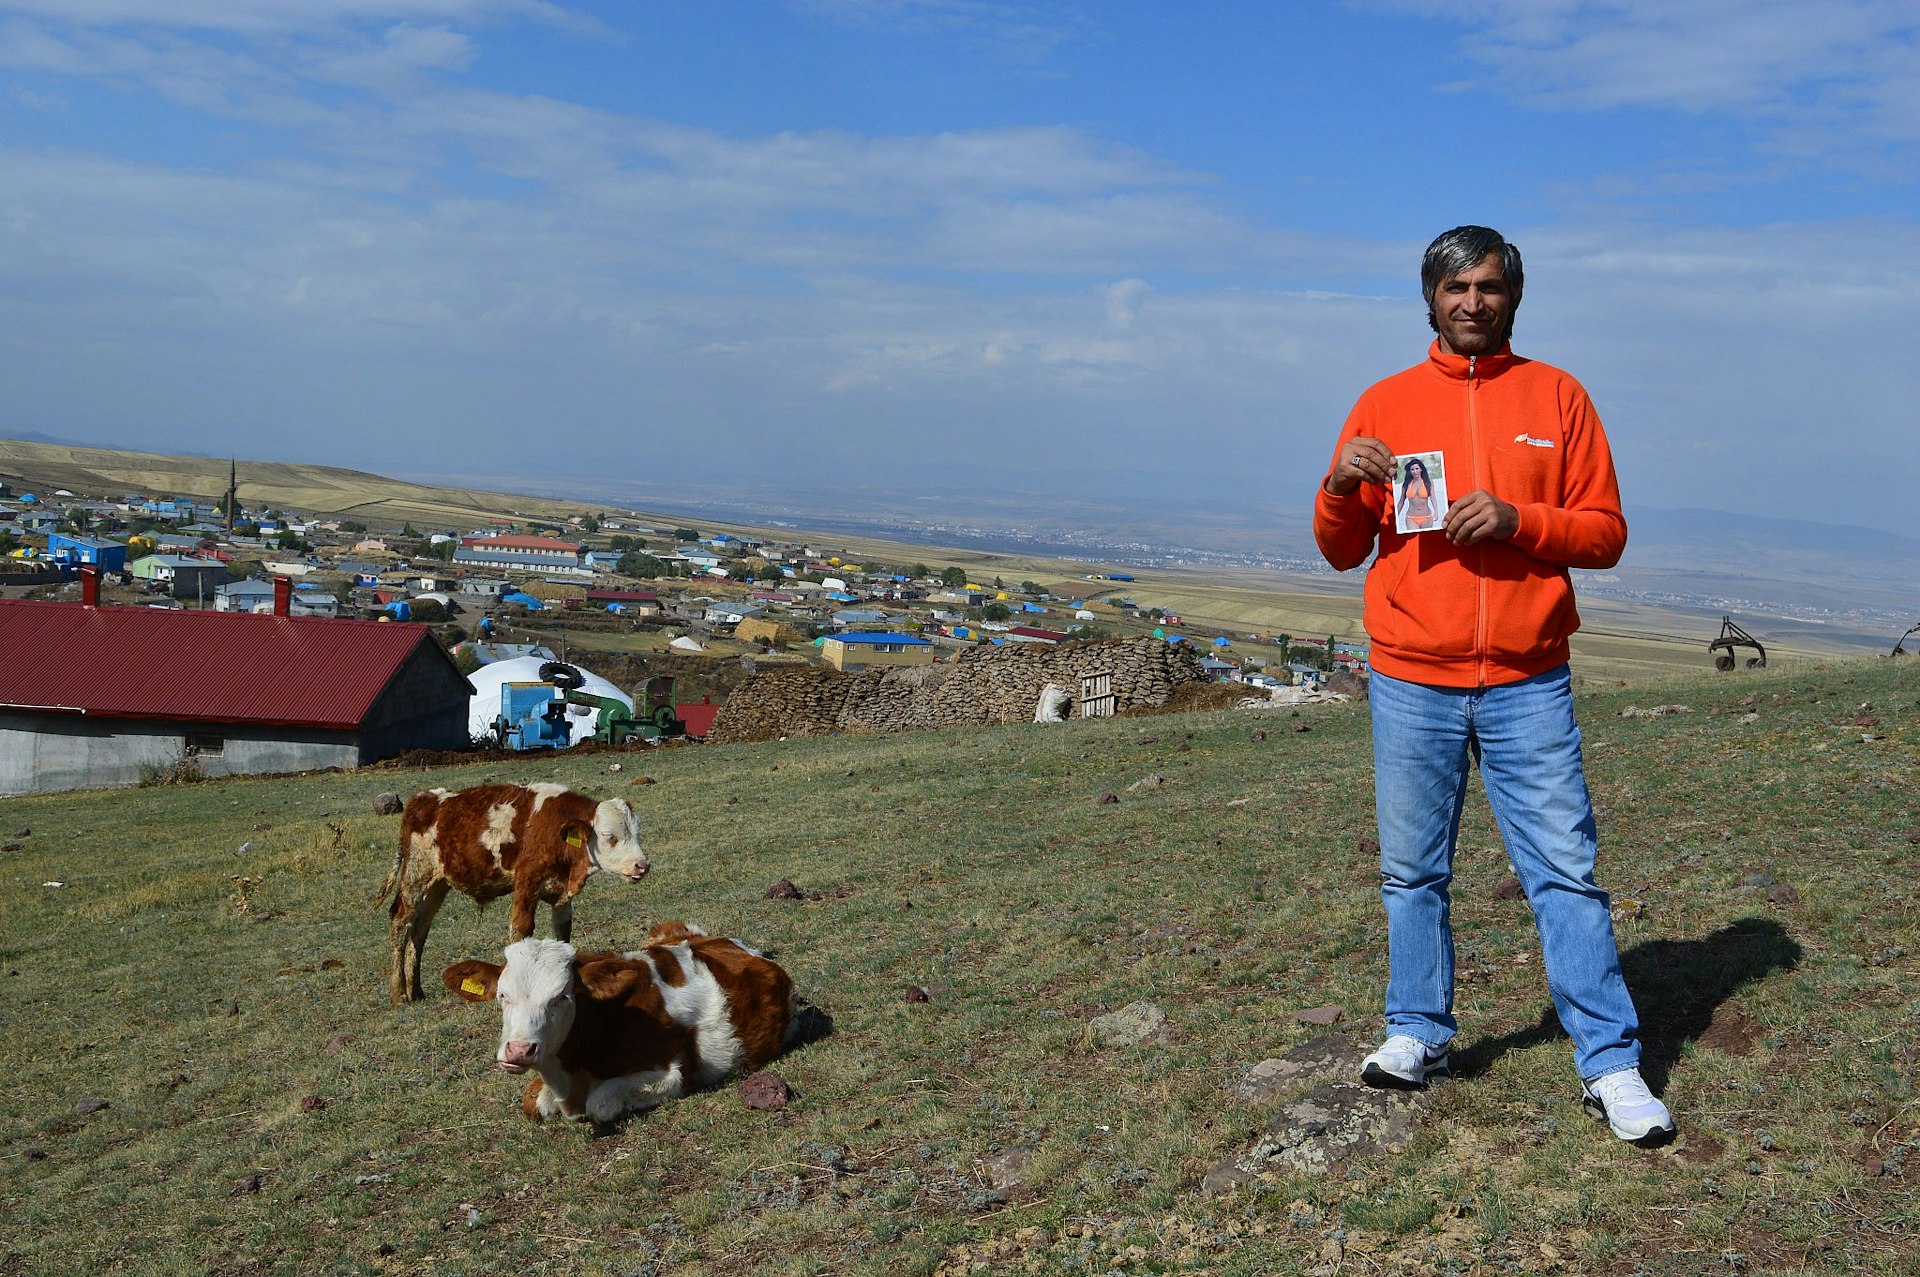 A villager wearing jeans and an orange fleece stand in a field holding a picture of Kim Kardashian; there are some brown and white cows next to him with the village in the background.